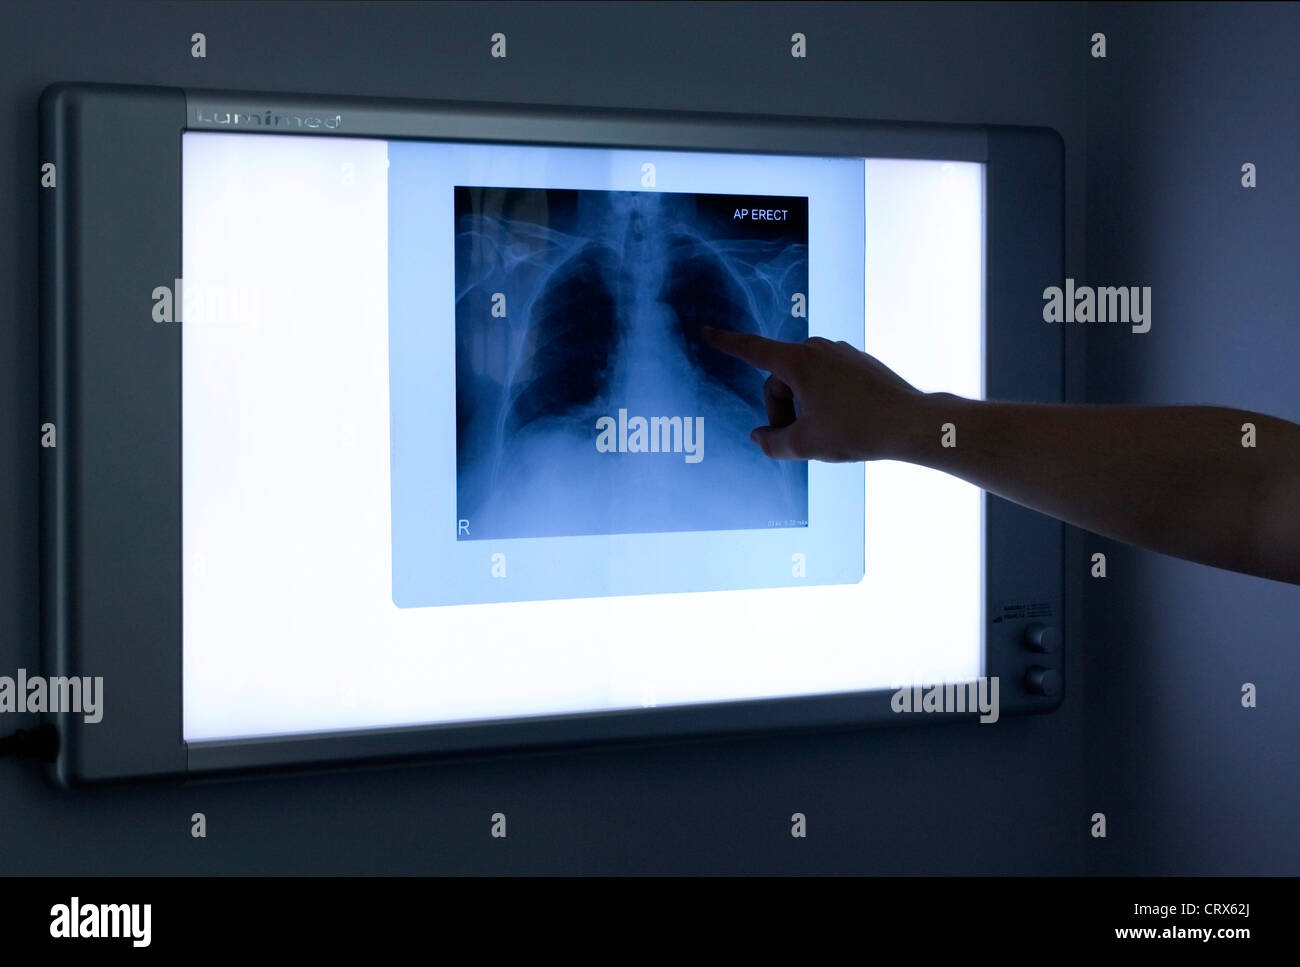 An x-ray of a patient's chesst being reviewed on an illuminated wall-mounted monitoring screen Stock Photo